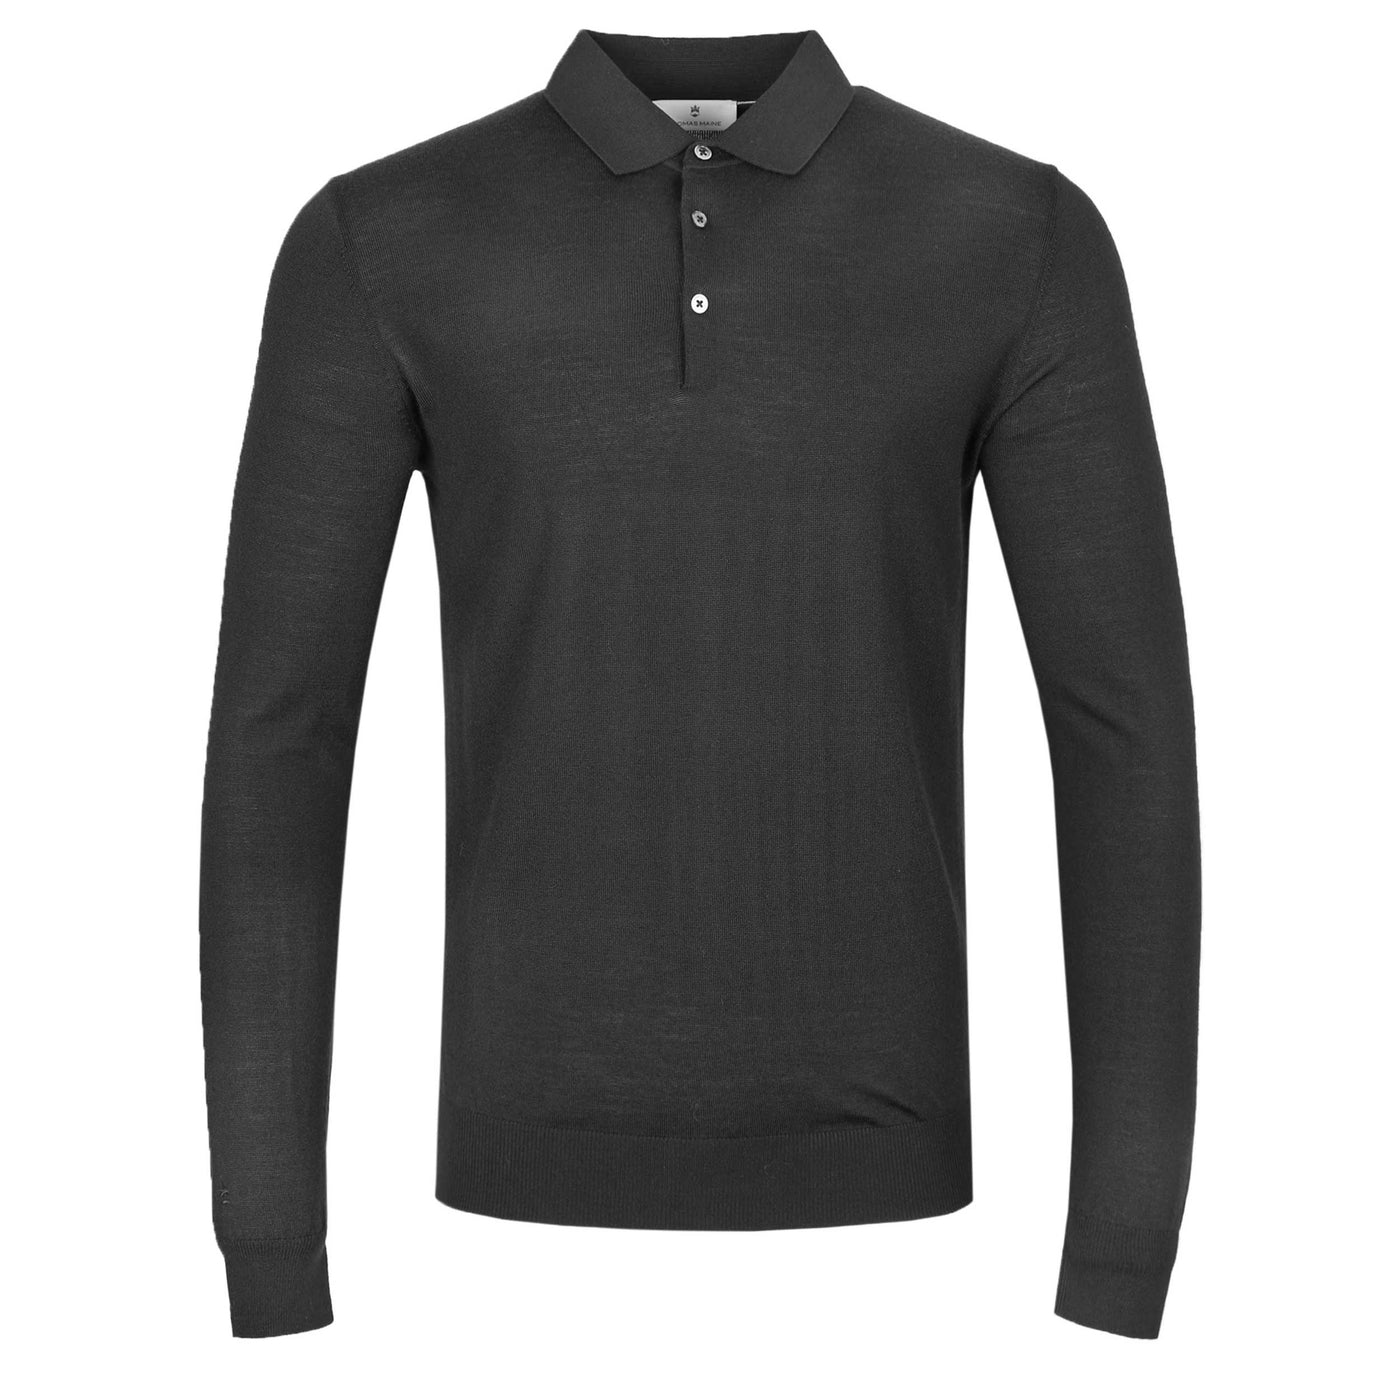 Thomas Maine 3 Button Long Sleeve Knitted Polo in Black